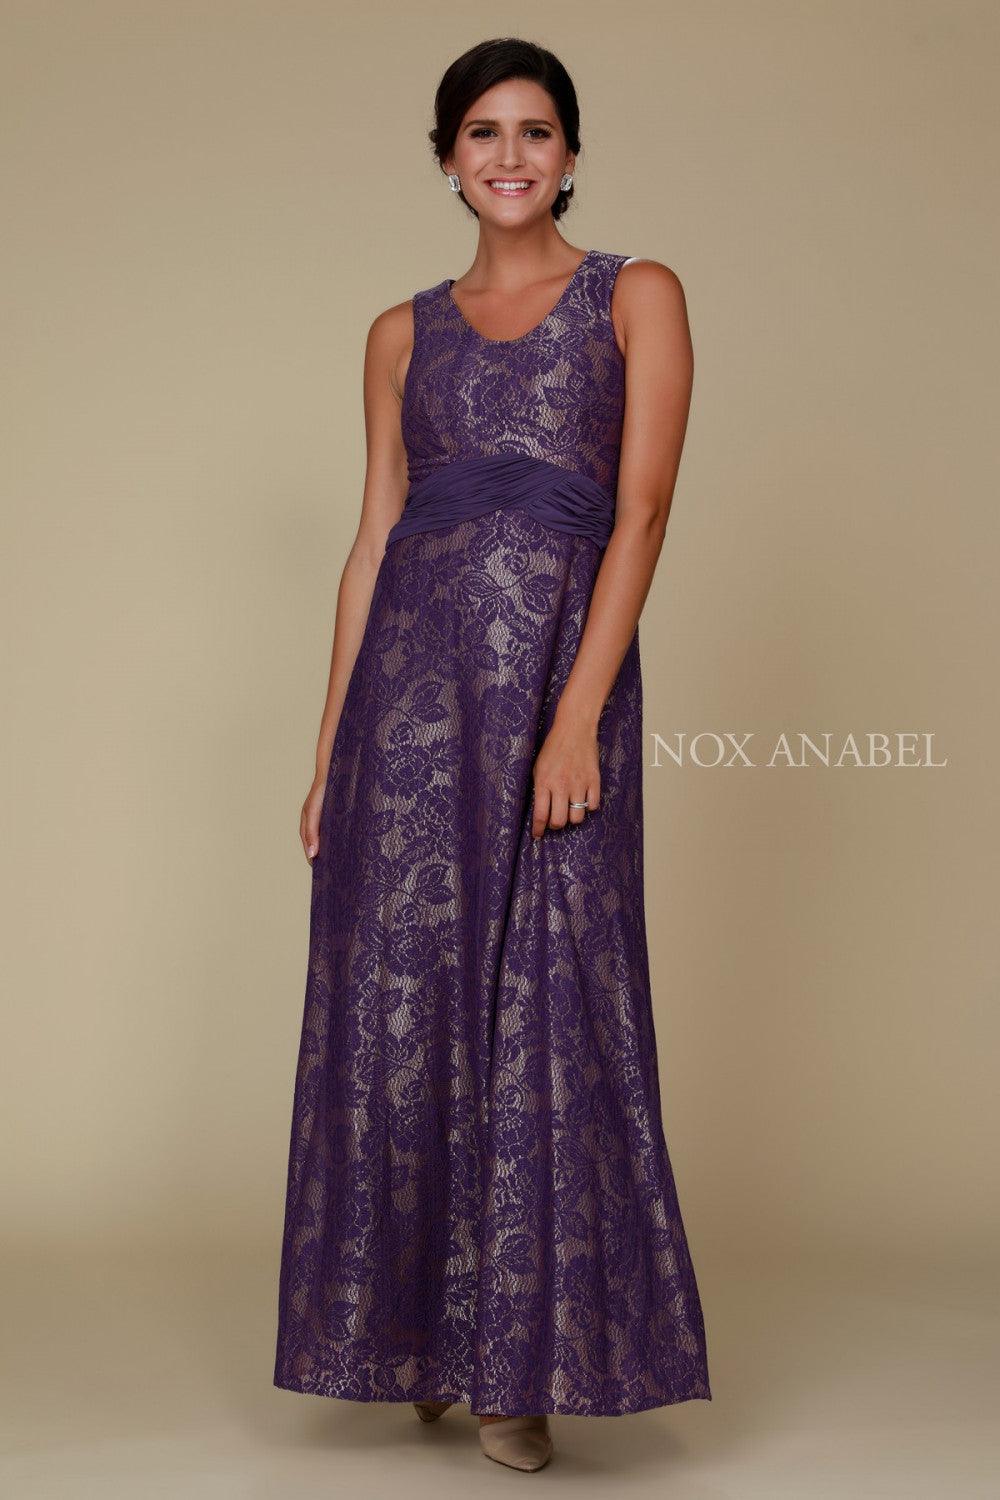 Long Lace Formal Mother of the Bride Dress - The Dress Outlet Nox Anabel